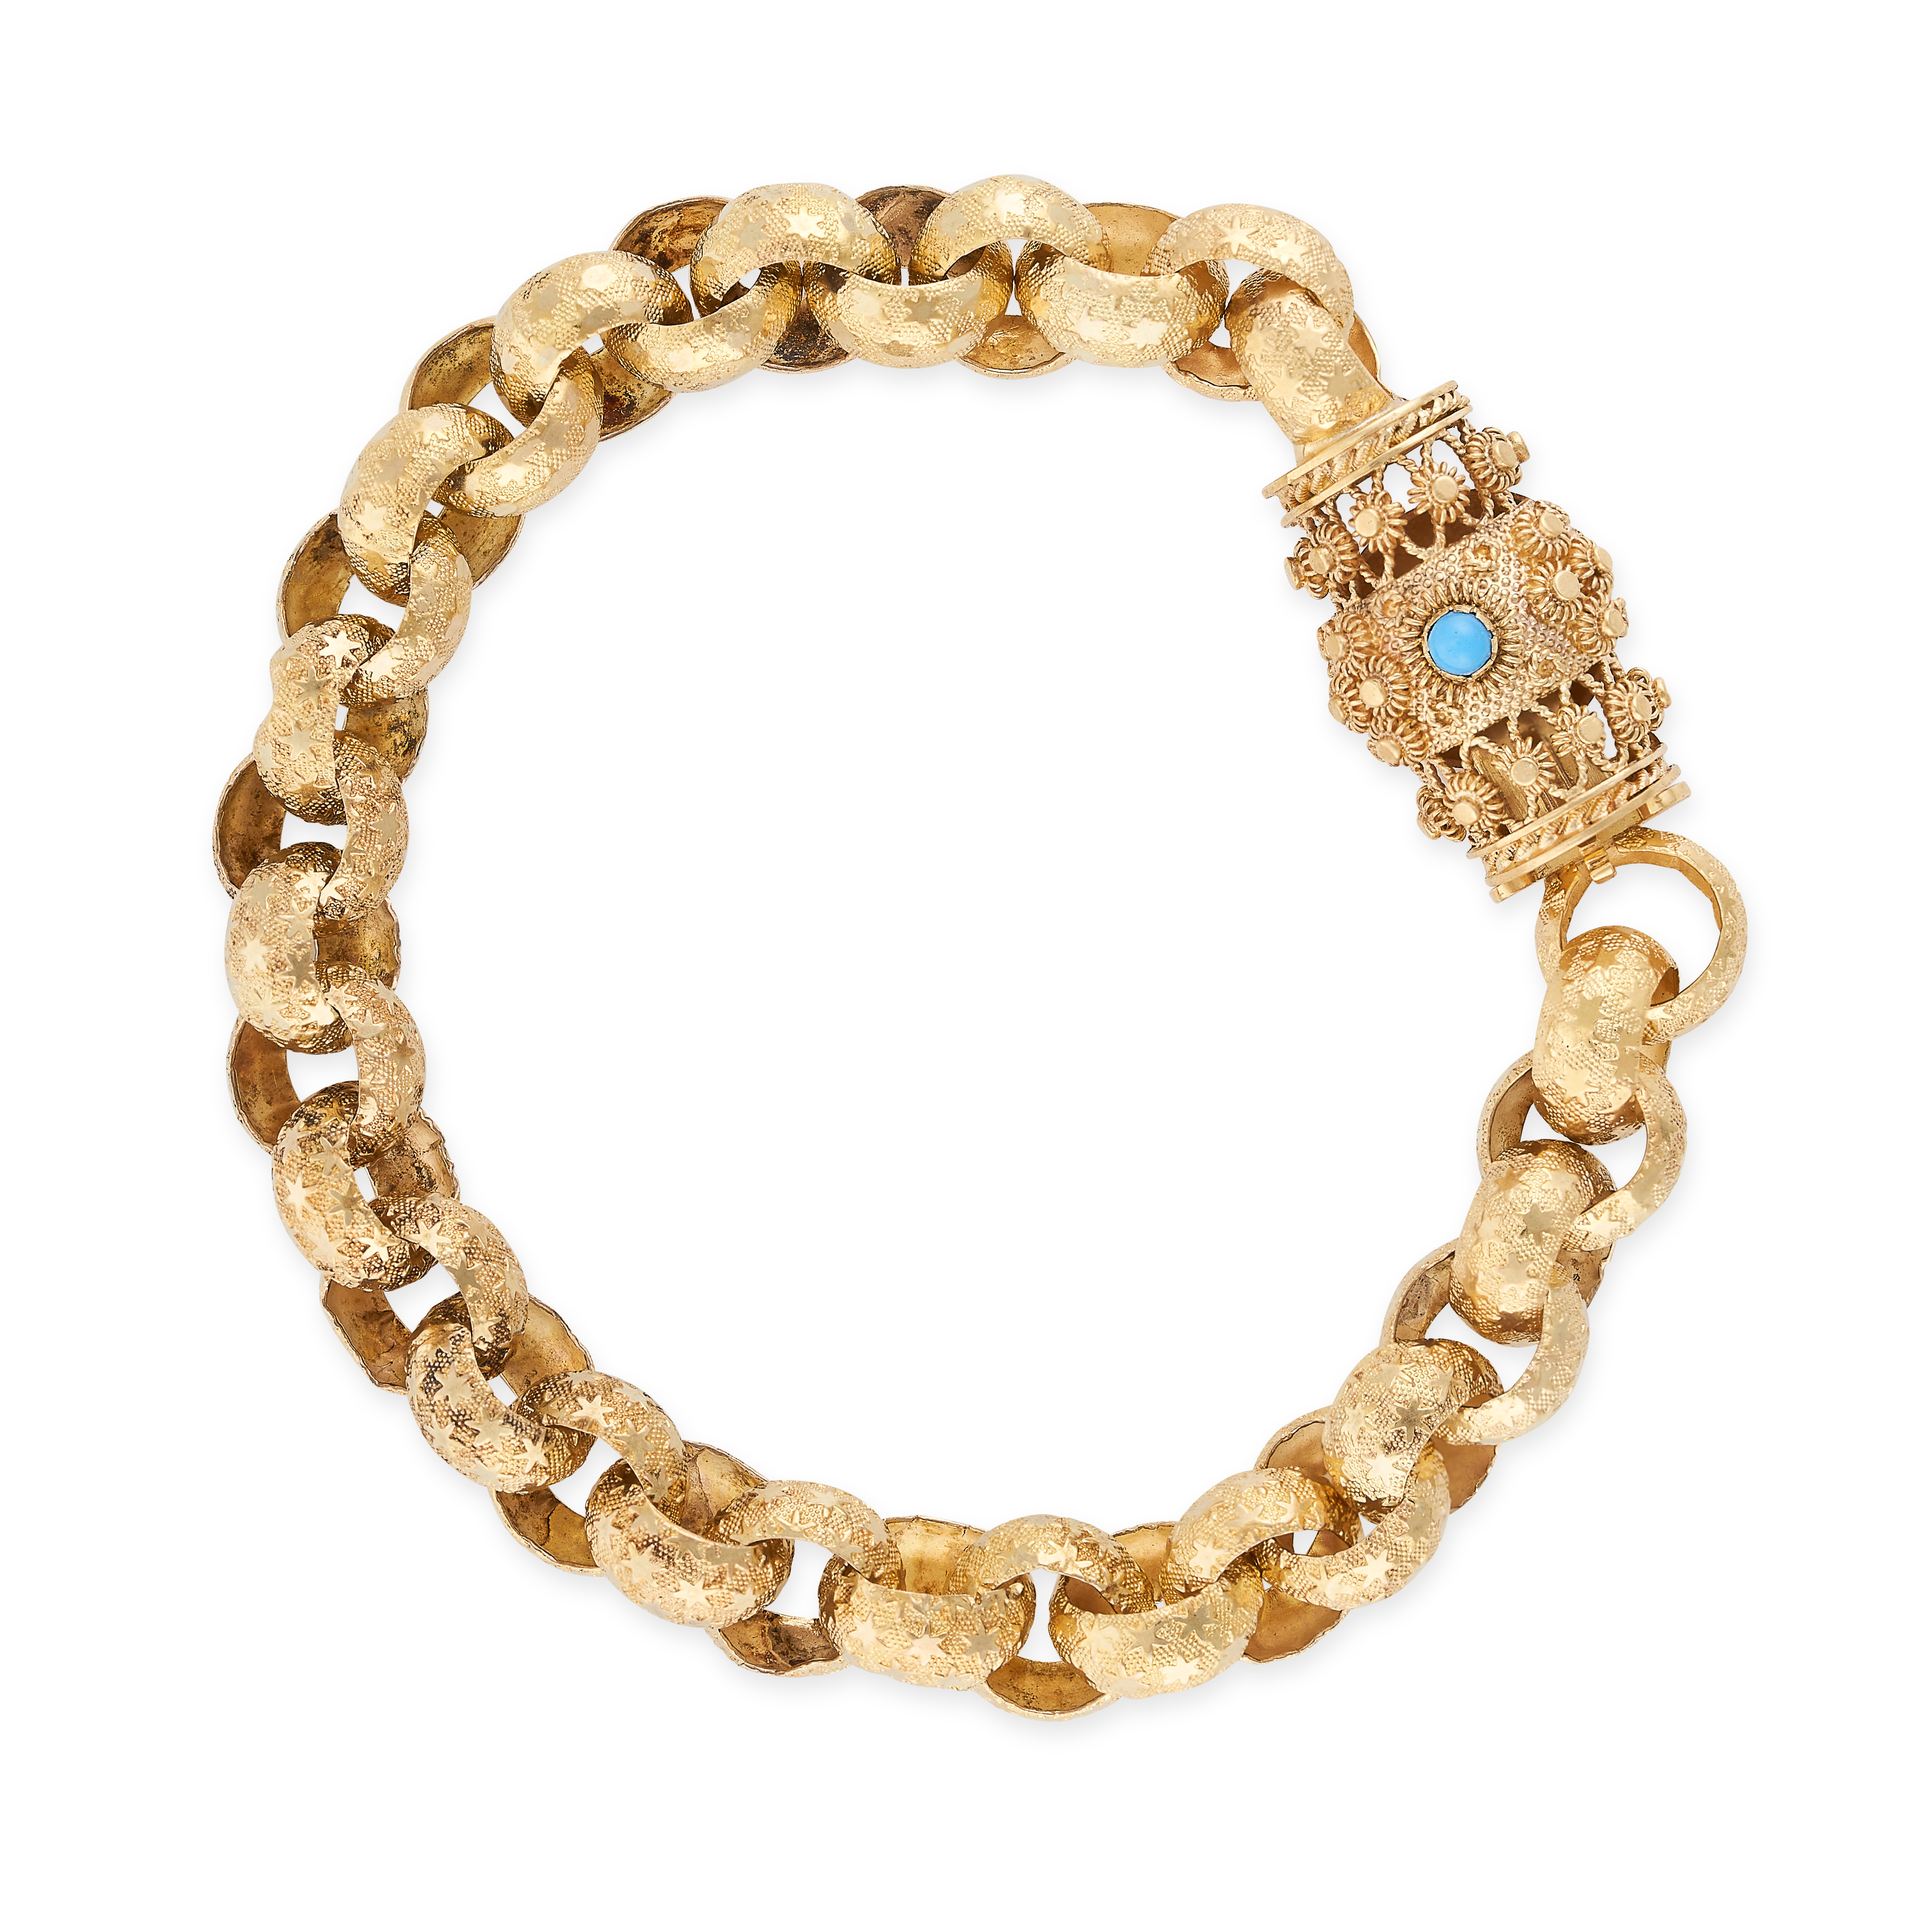 AN ANTIQUE TURQUOISE BRACELET, EARLY 19TH CENTURY in yellow gold, formed of belcher links with